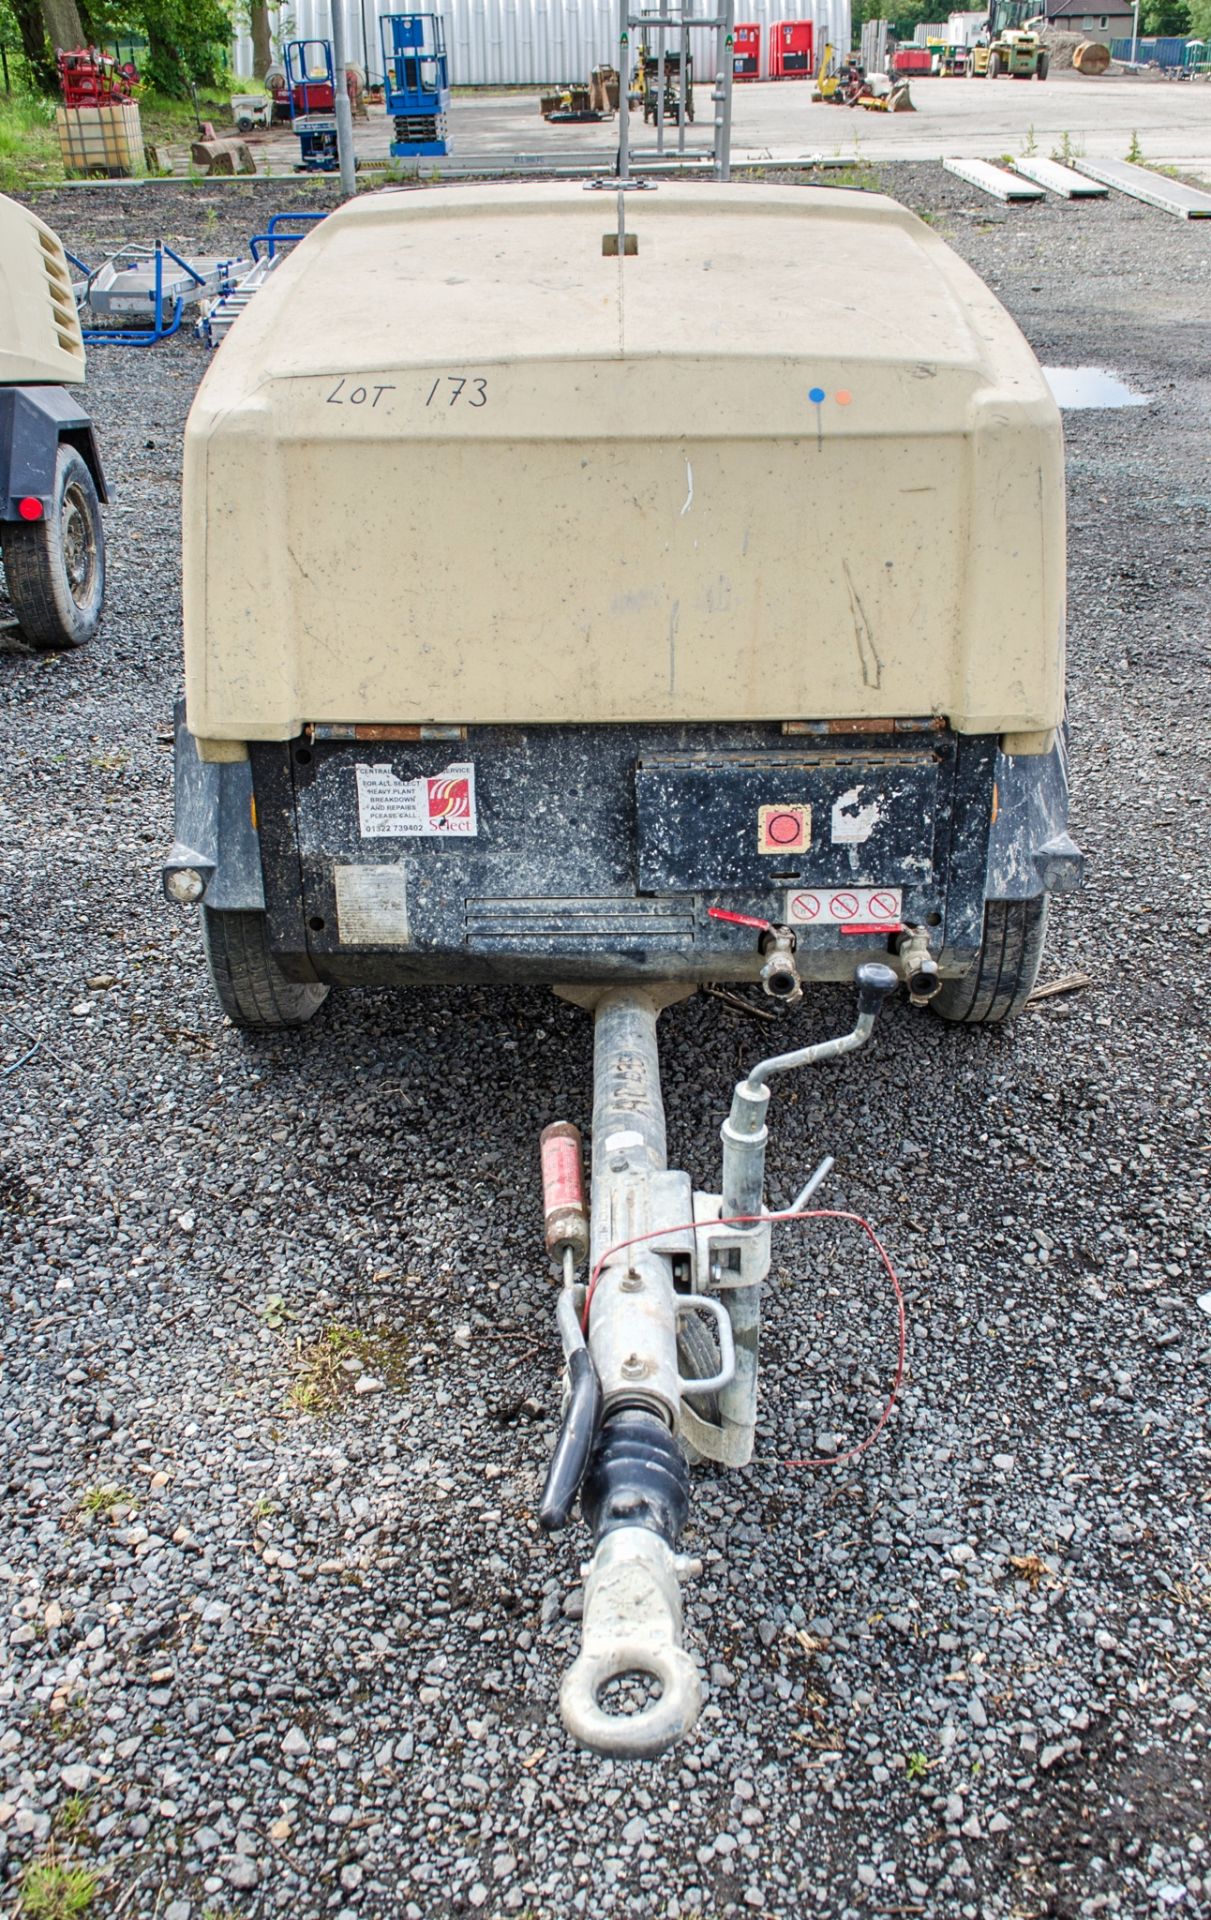 Doosan 741+ diesel driven mobile air compressor Year: 2012 S/N: 431114 Recorded Hours: 1565 AC435 - Image 3 of 6